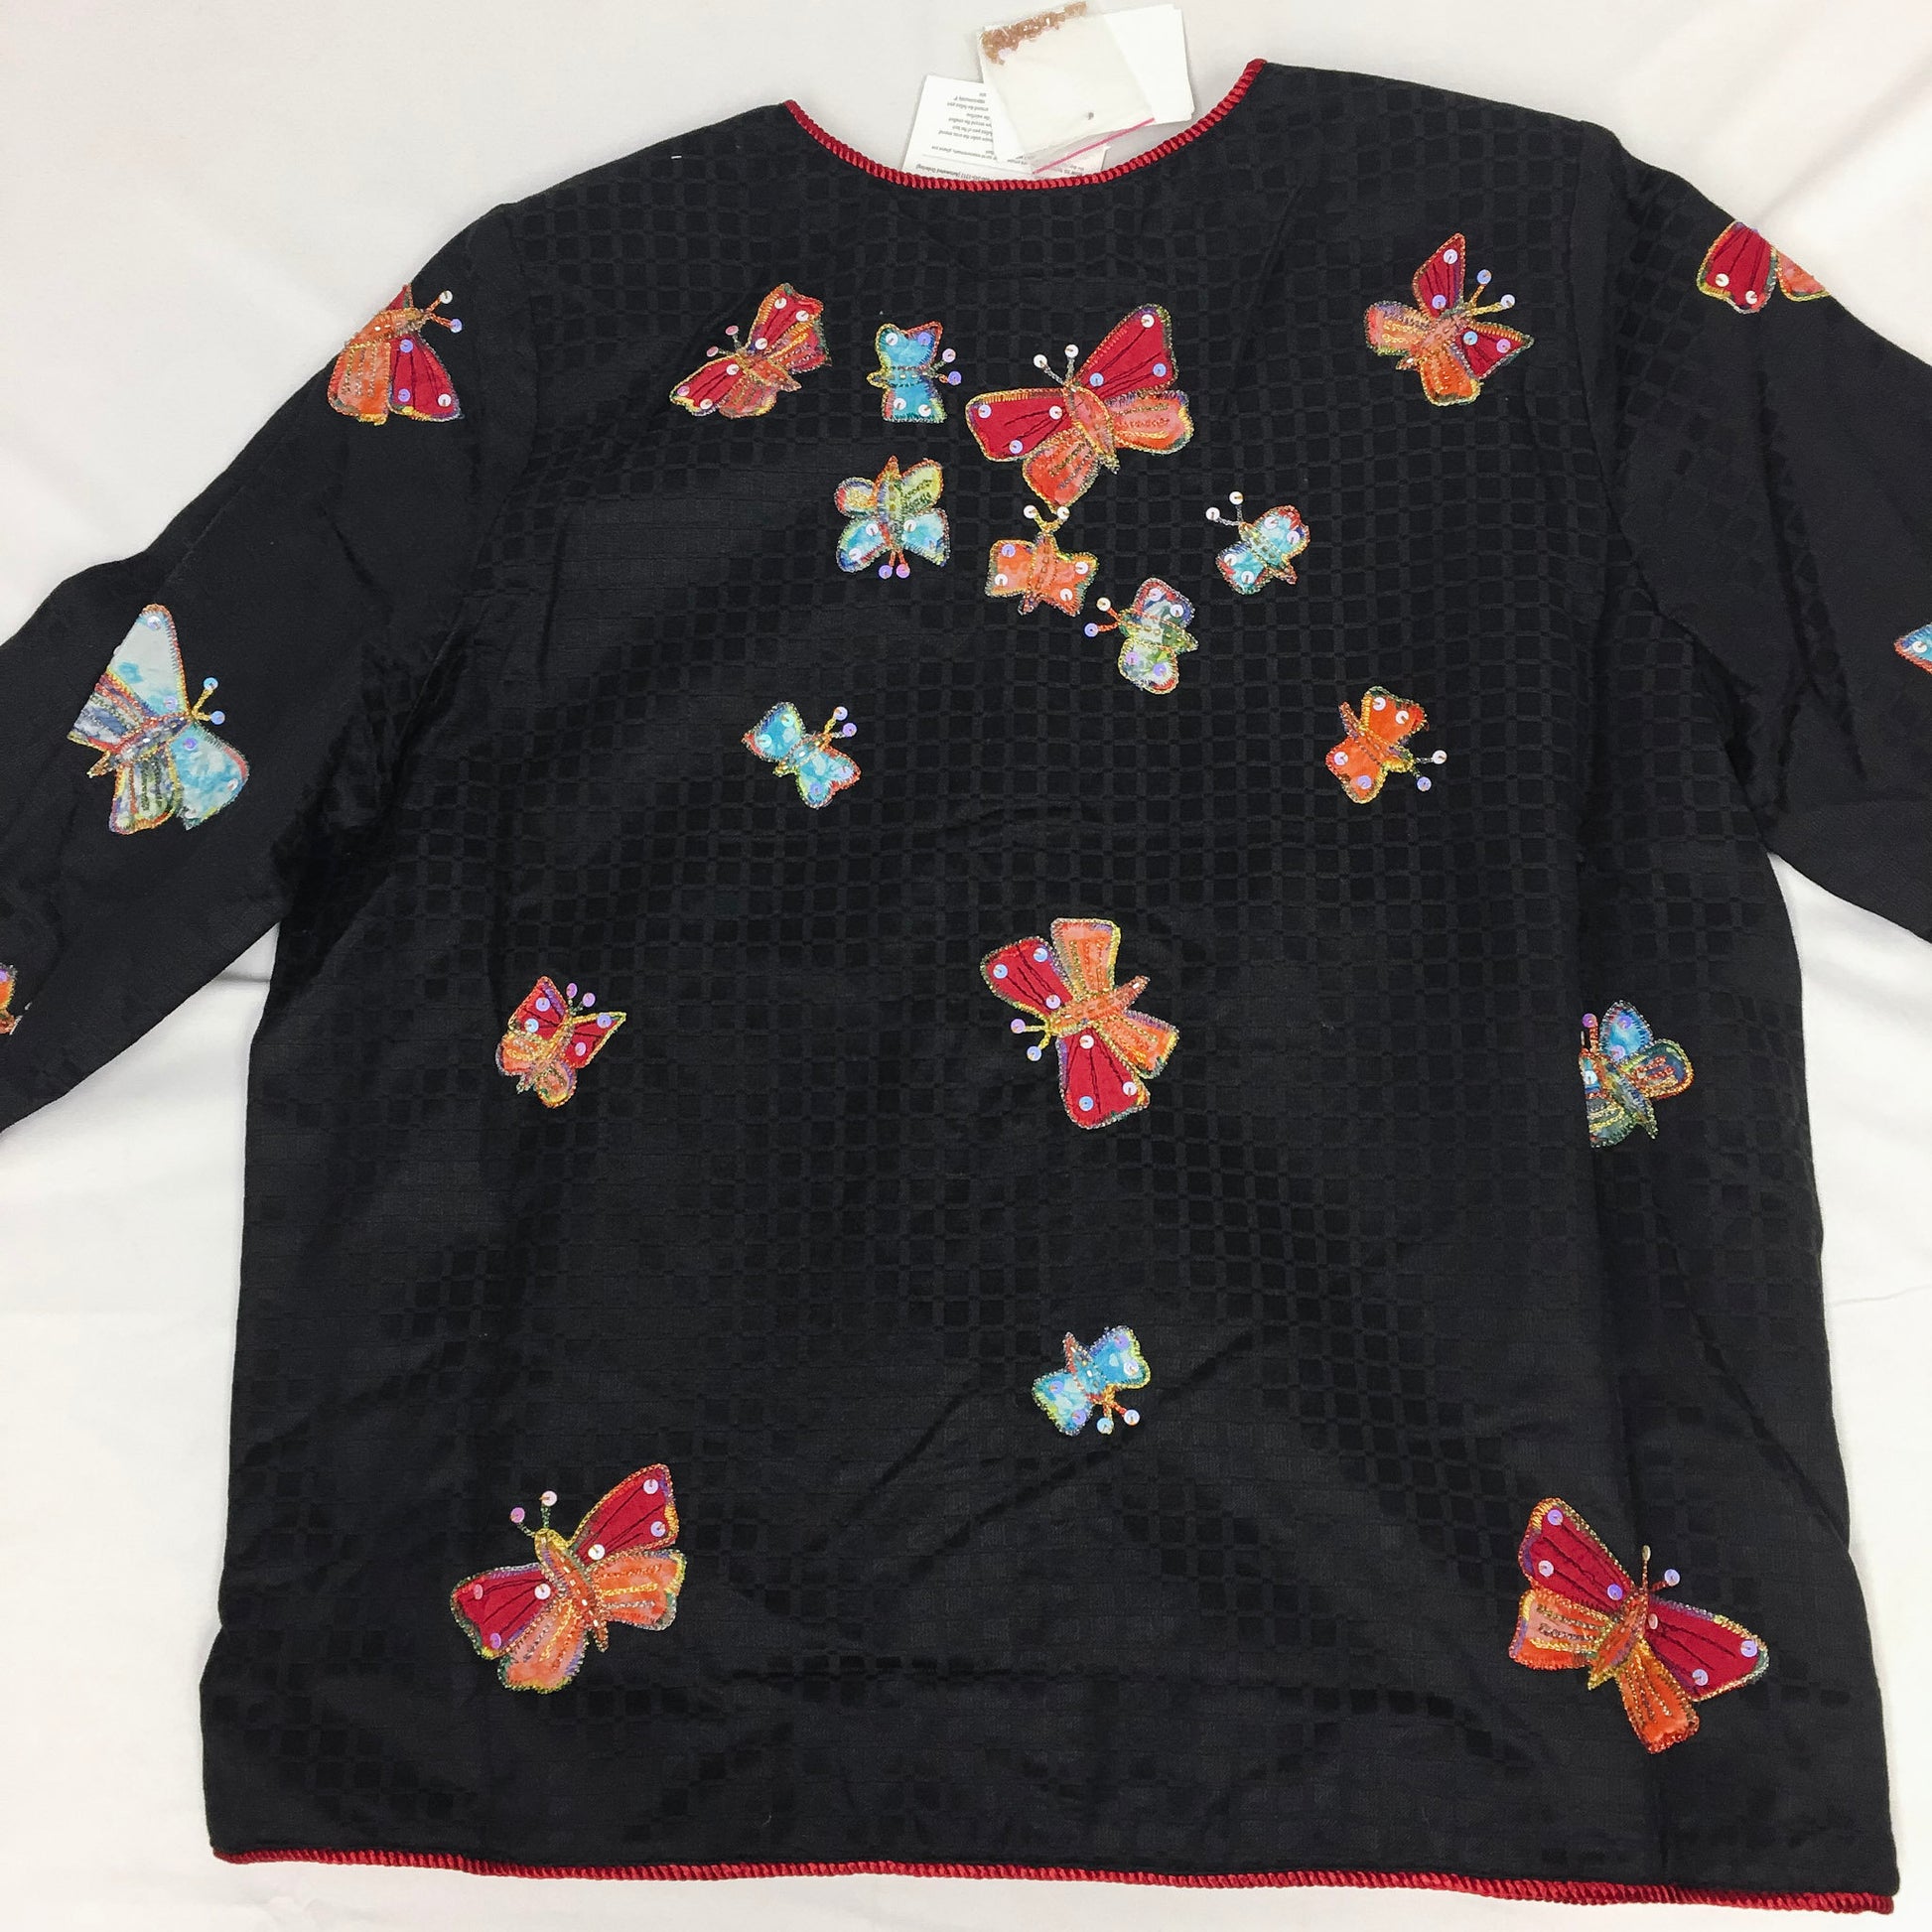 NWT Vintage Indigo Moon Black Light Jacket with Colorful Butterfly Details. sz. L